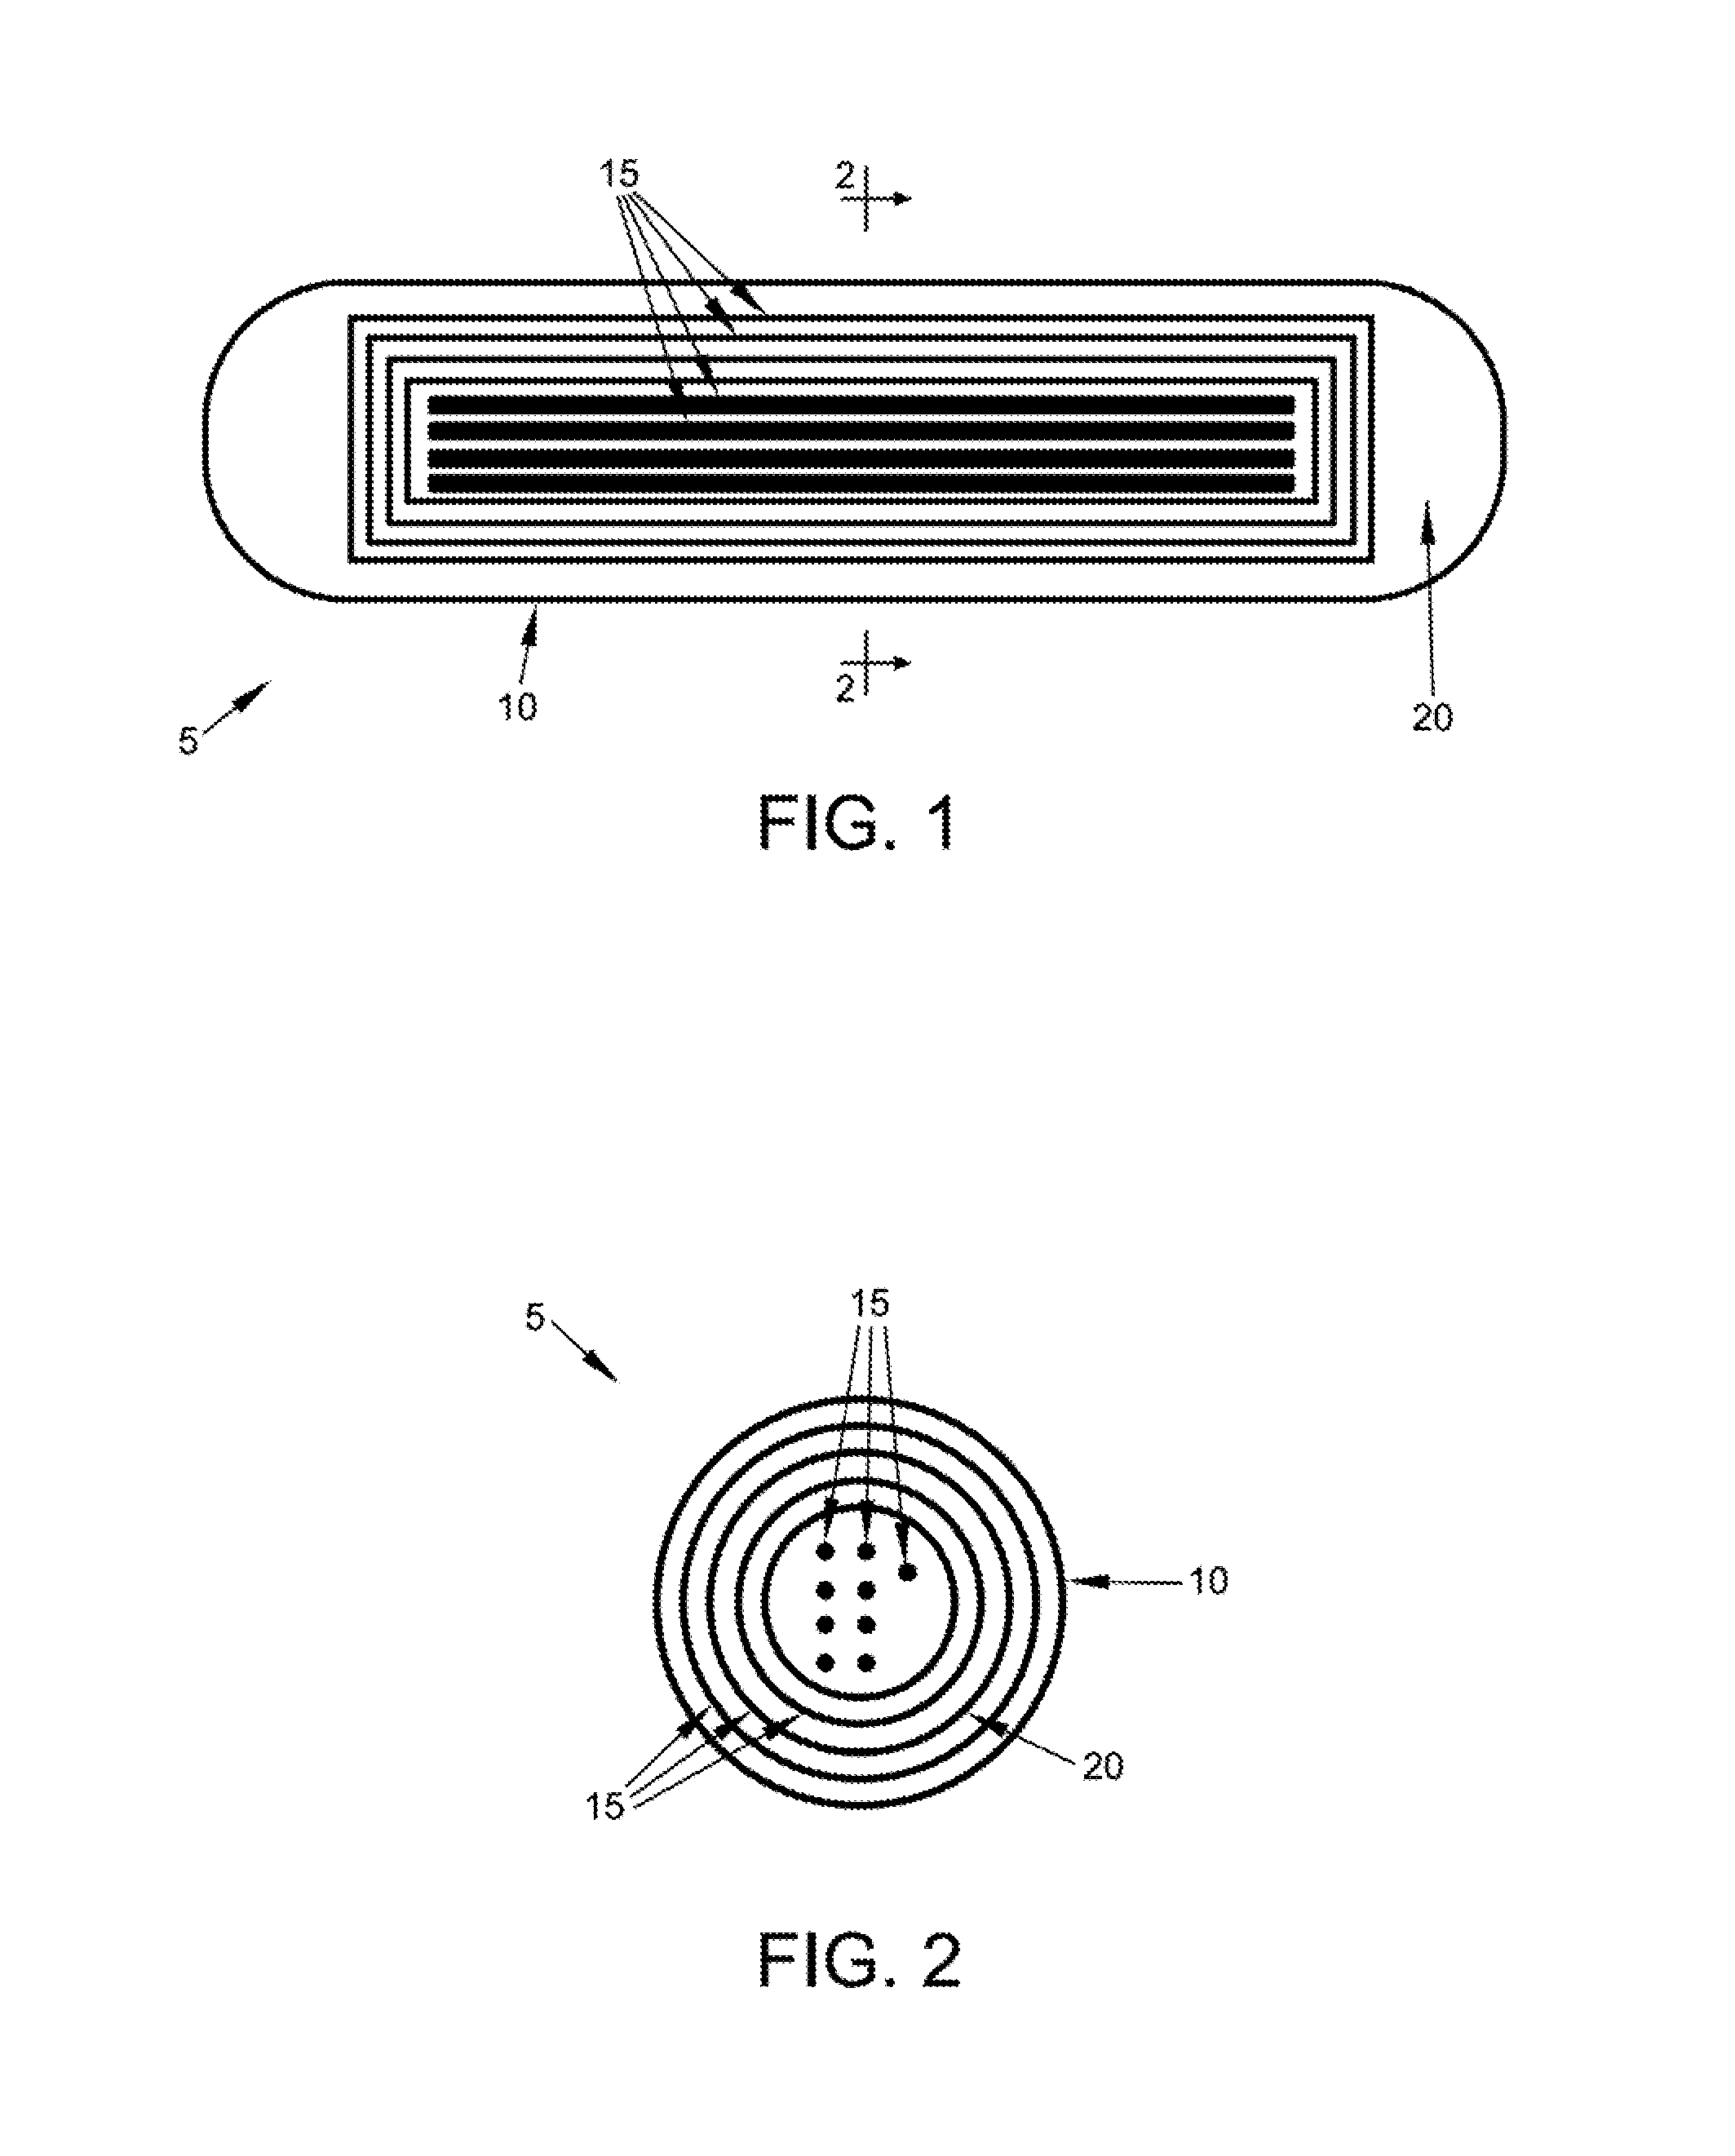 Method and apparatus for treating bone fractures, and/or for fortifying and/or augmenting bone, including the provision and use of composite implants